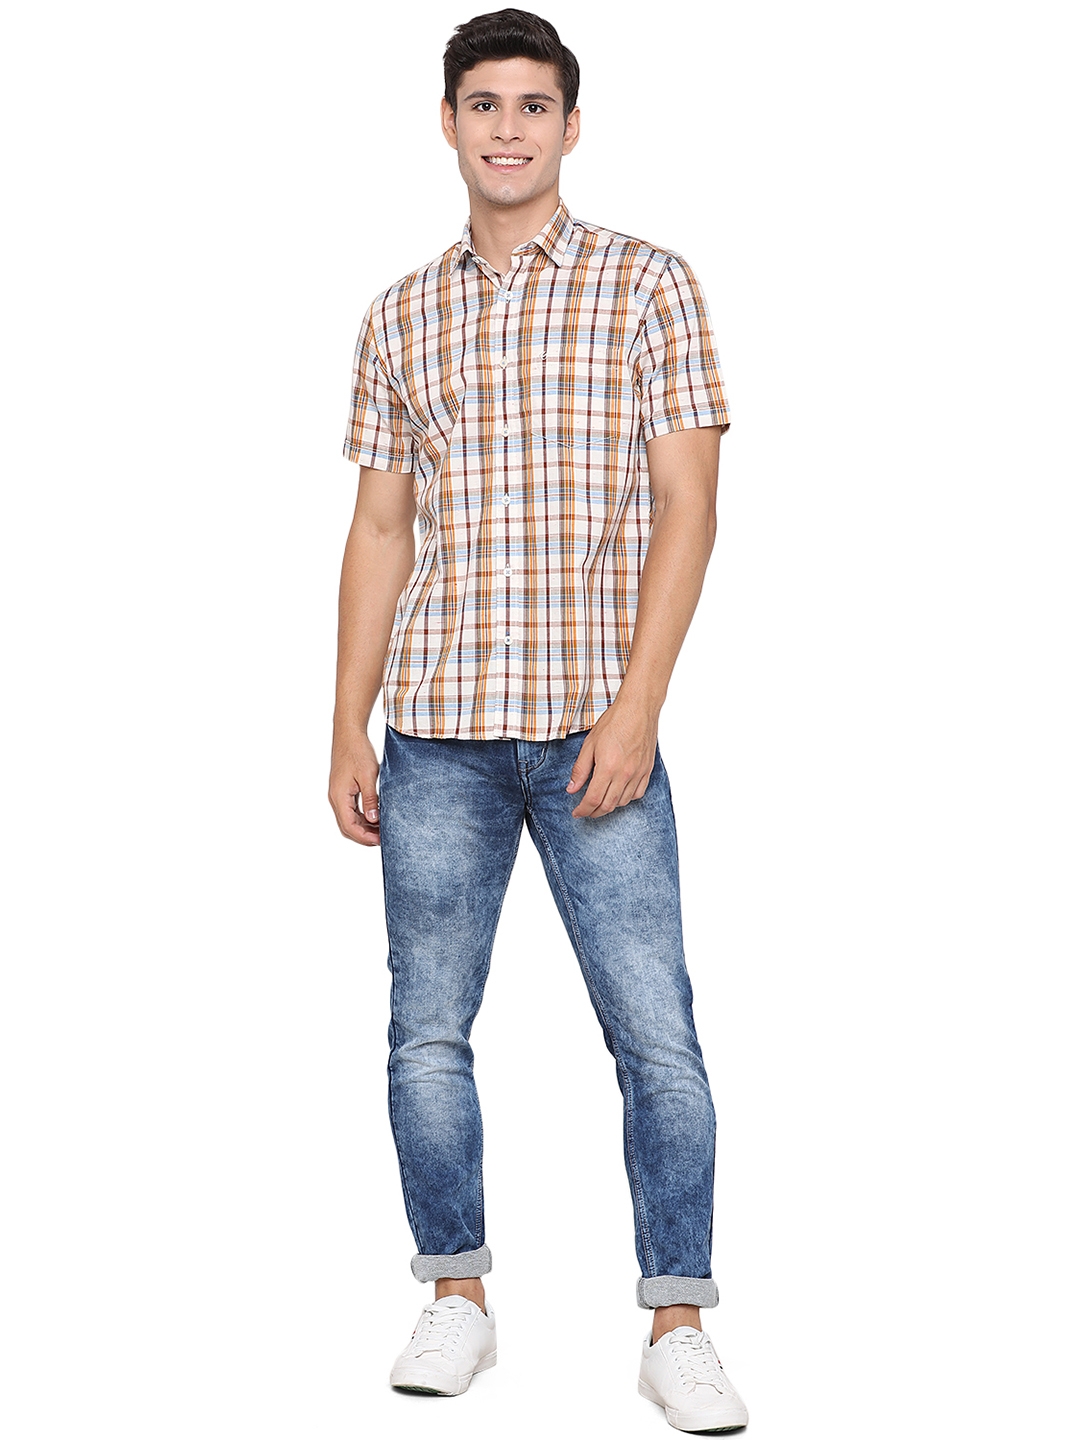 Greenfibre | Antique White Checked Slim Fit Casual Shirt | Greenfibre 3